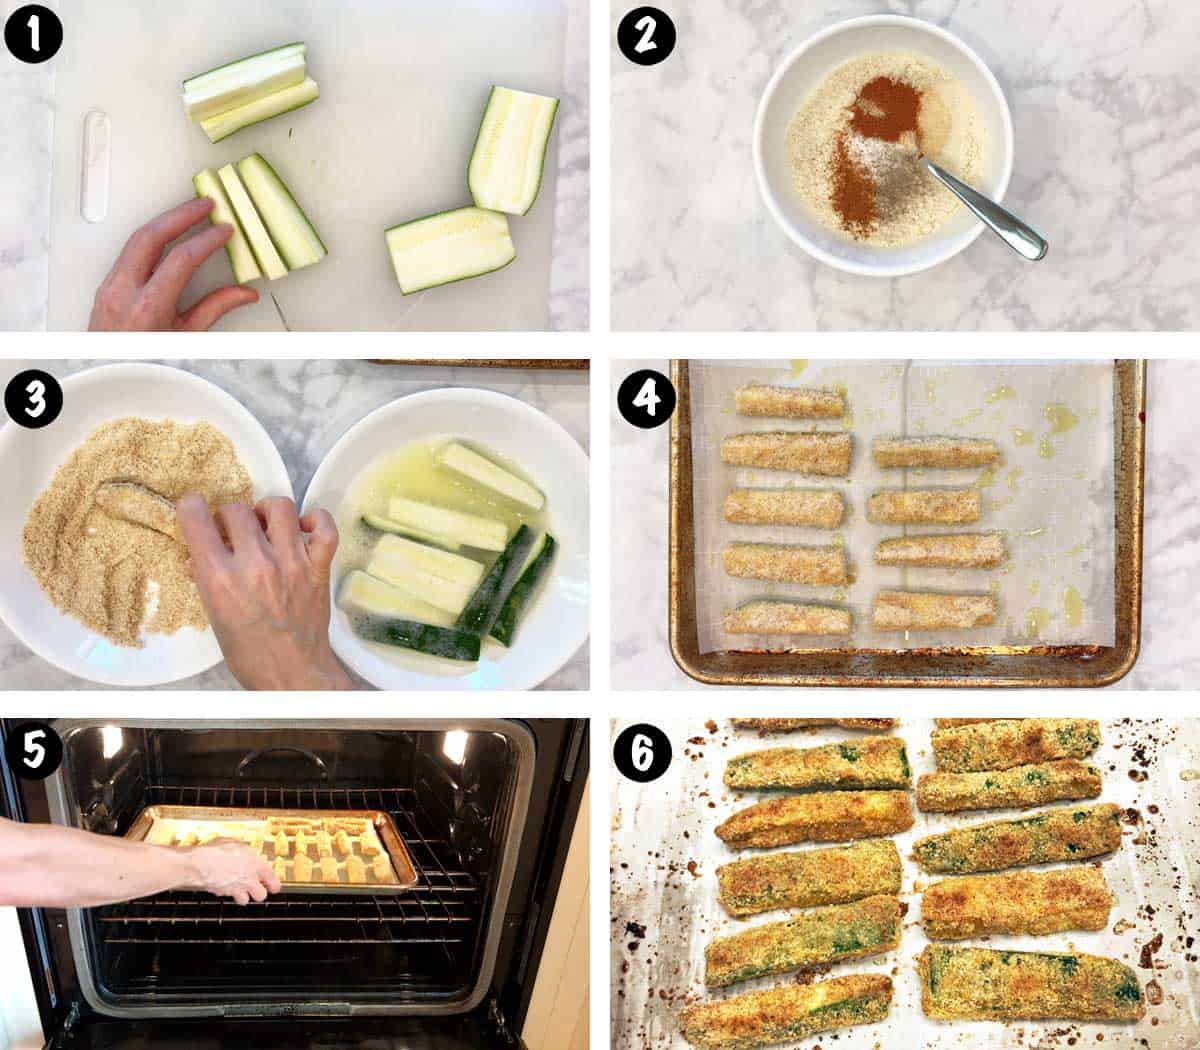 A six-photo collage showing the steps for making zucchini fries. 